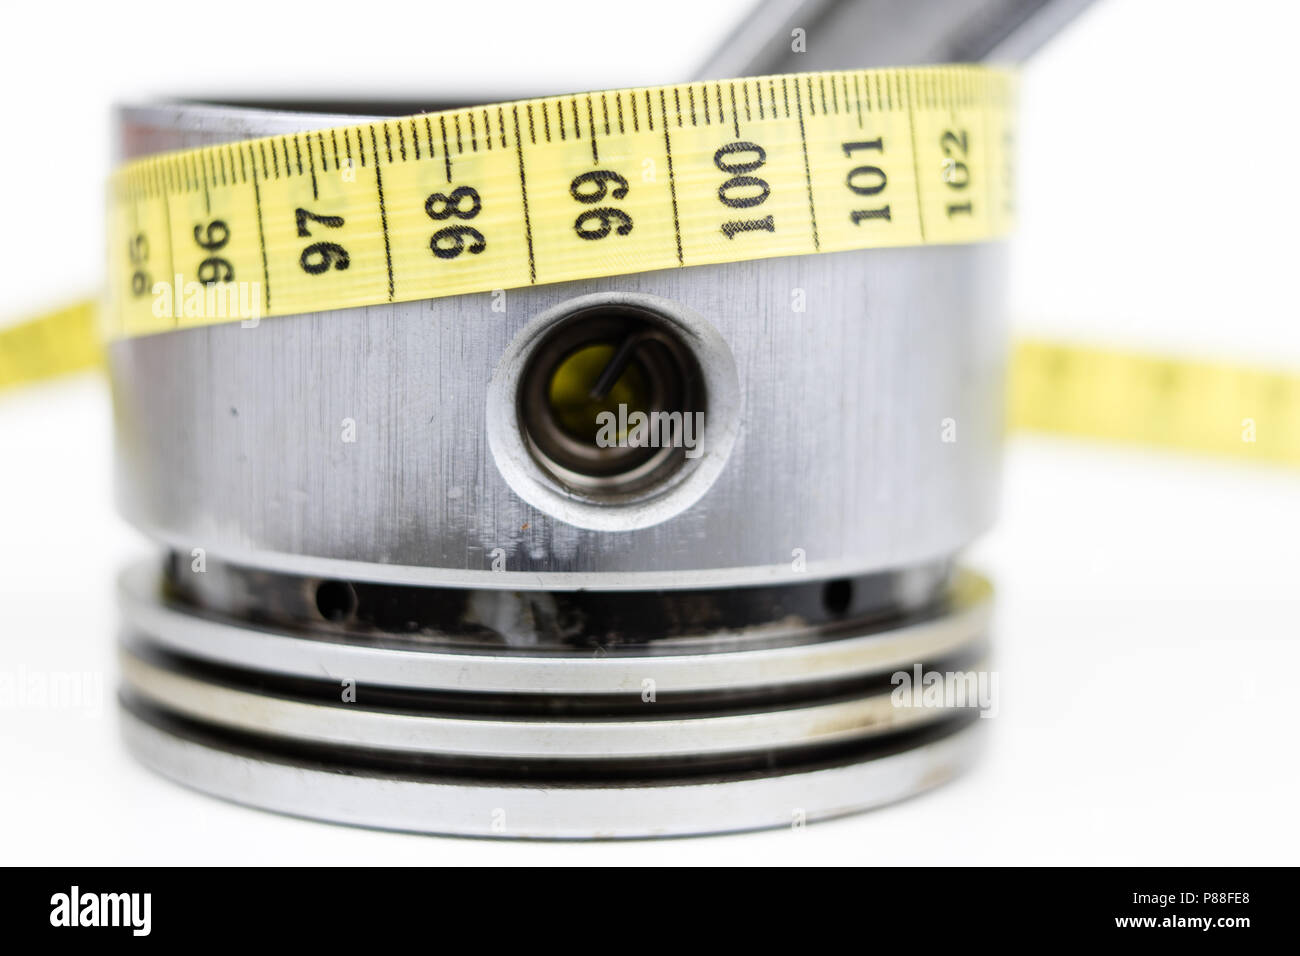 A piston from an internal combustion engine and a tailor measure on a white table. Car parts and tailor centimeter. White background. Stock Photo